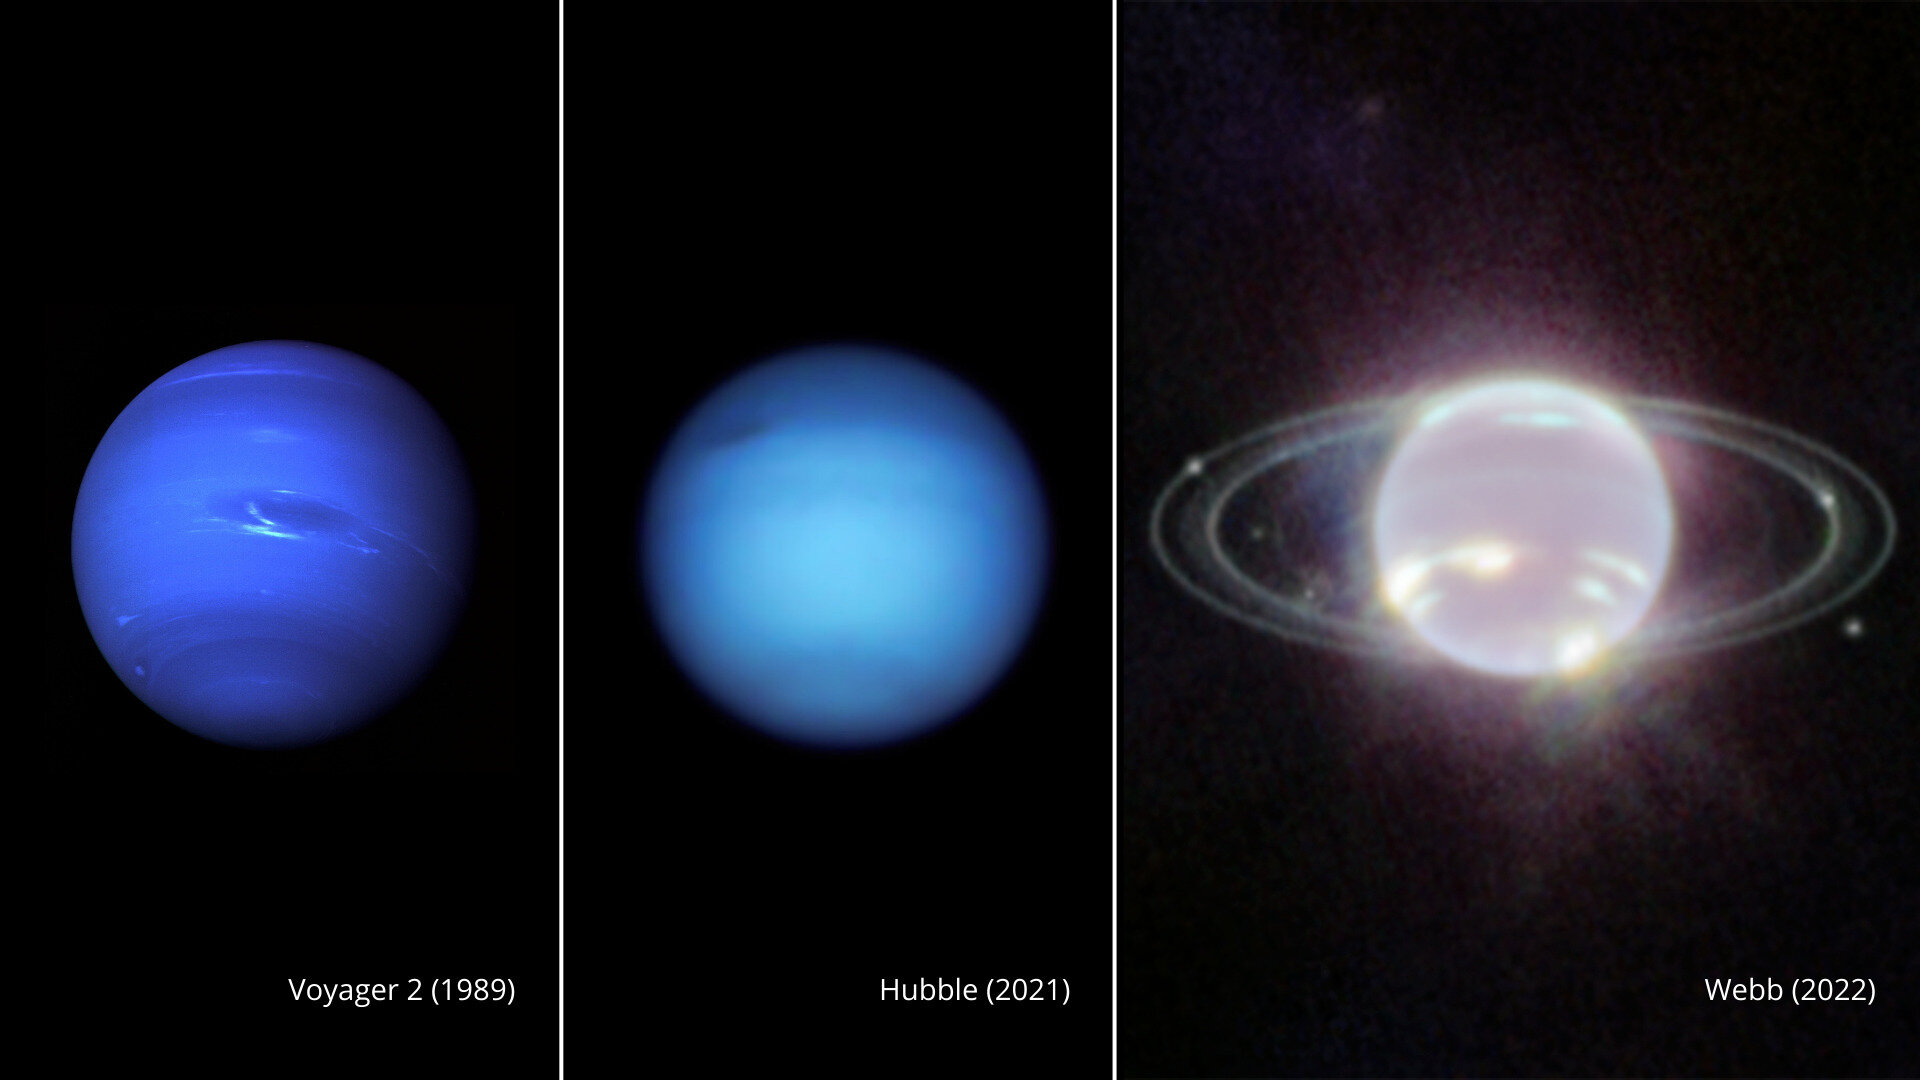 phys.org - MARCIA DUNN - Neptune and rings shine in photos from new space telescope